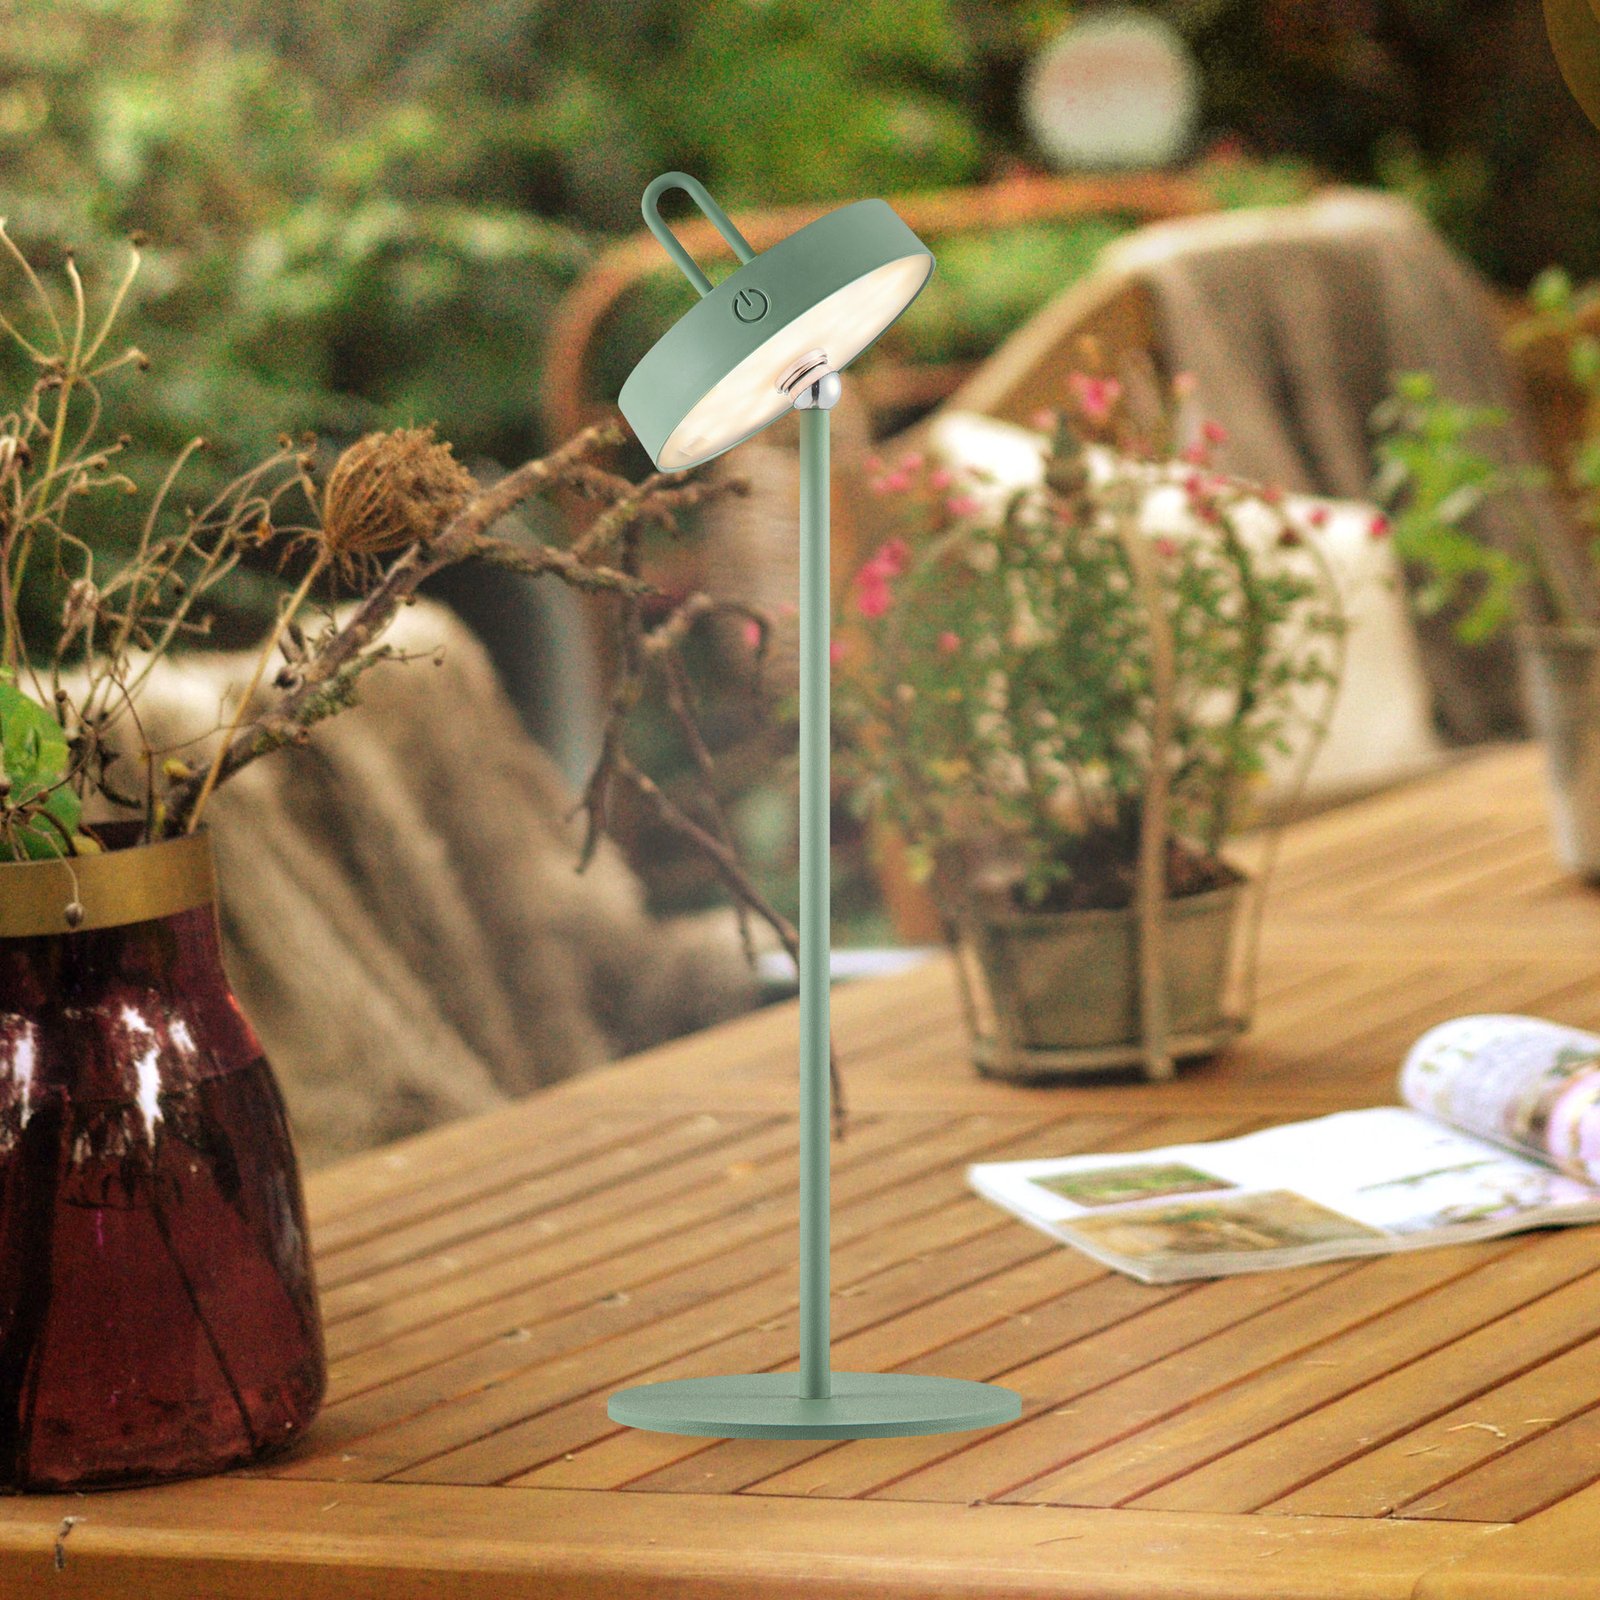 JUST LIGHT. Amag rechargeable LED table lamp, green, iron, IP44